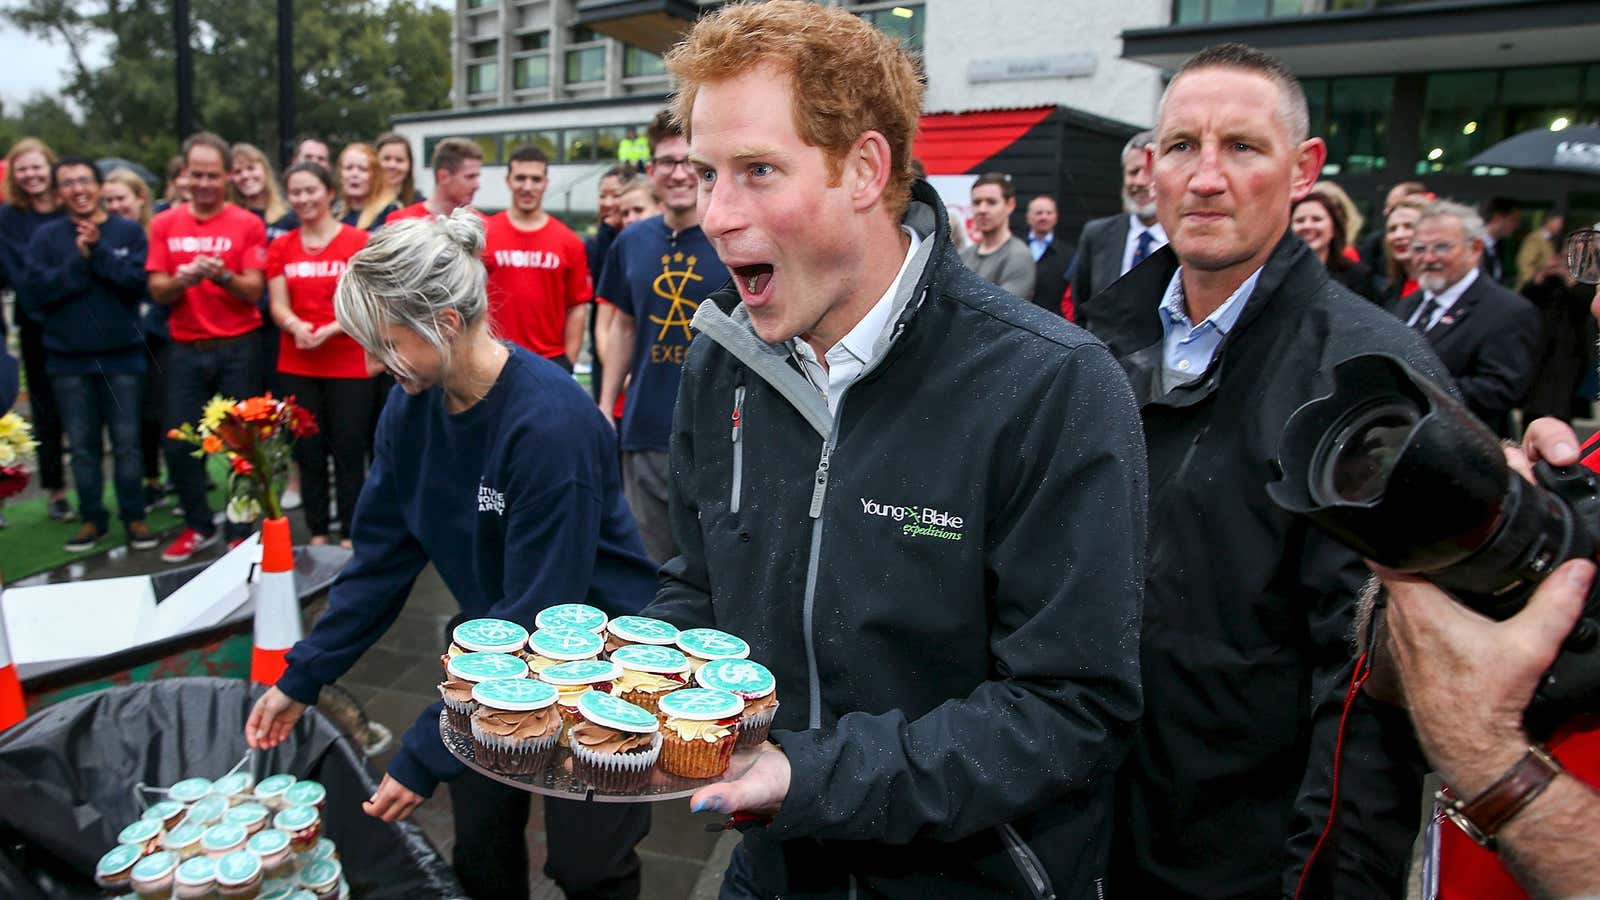 Prince Harry and your immune cells may have something in common.